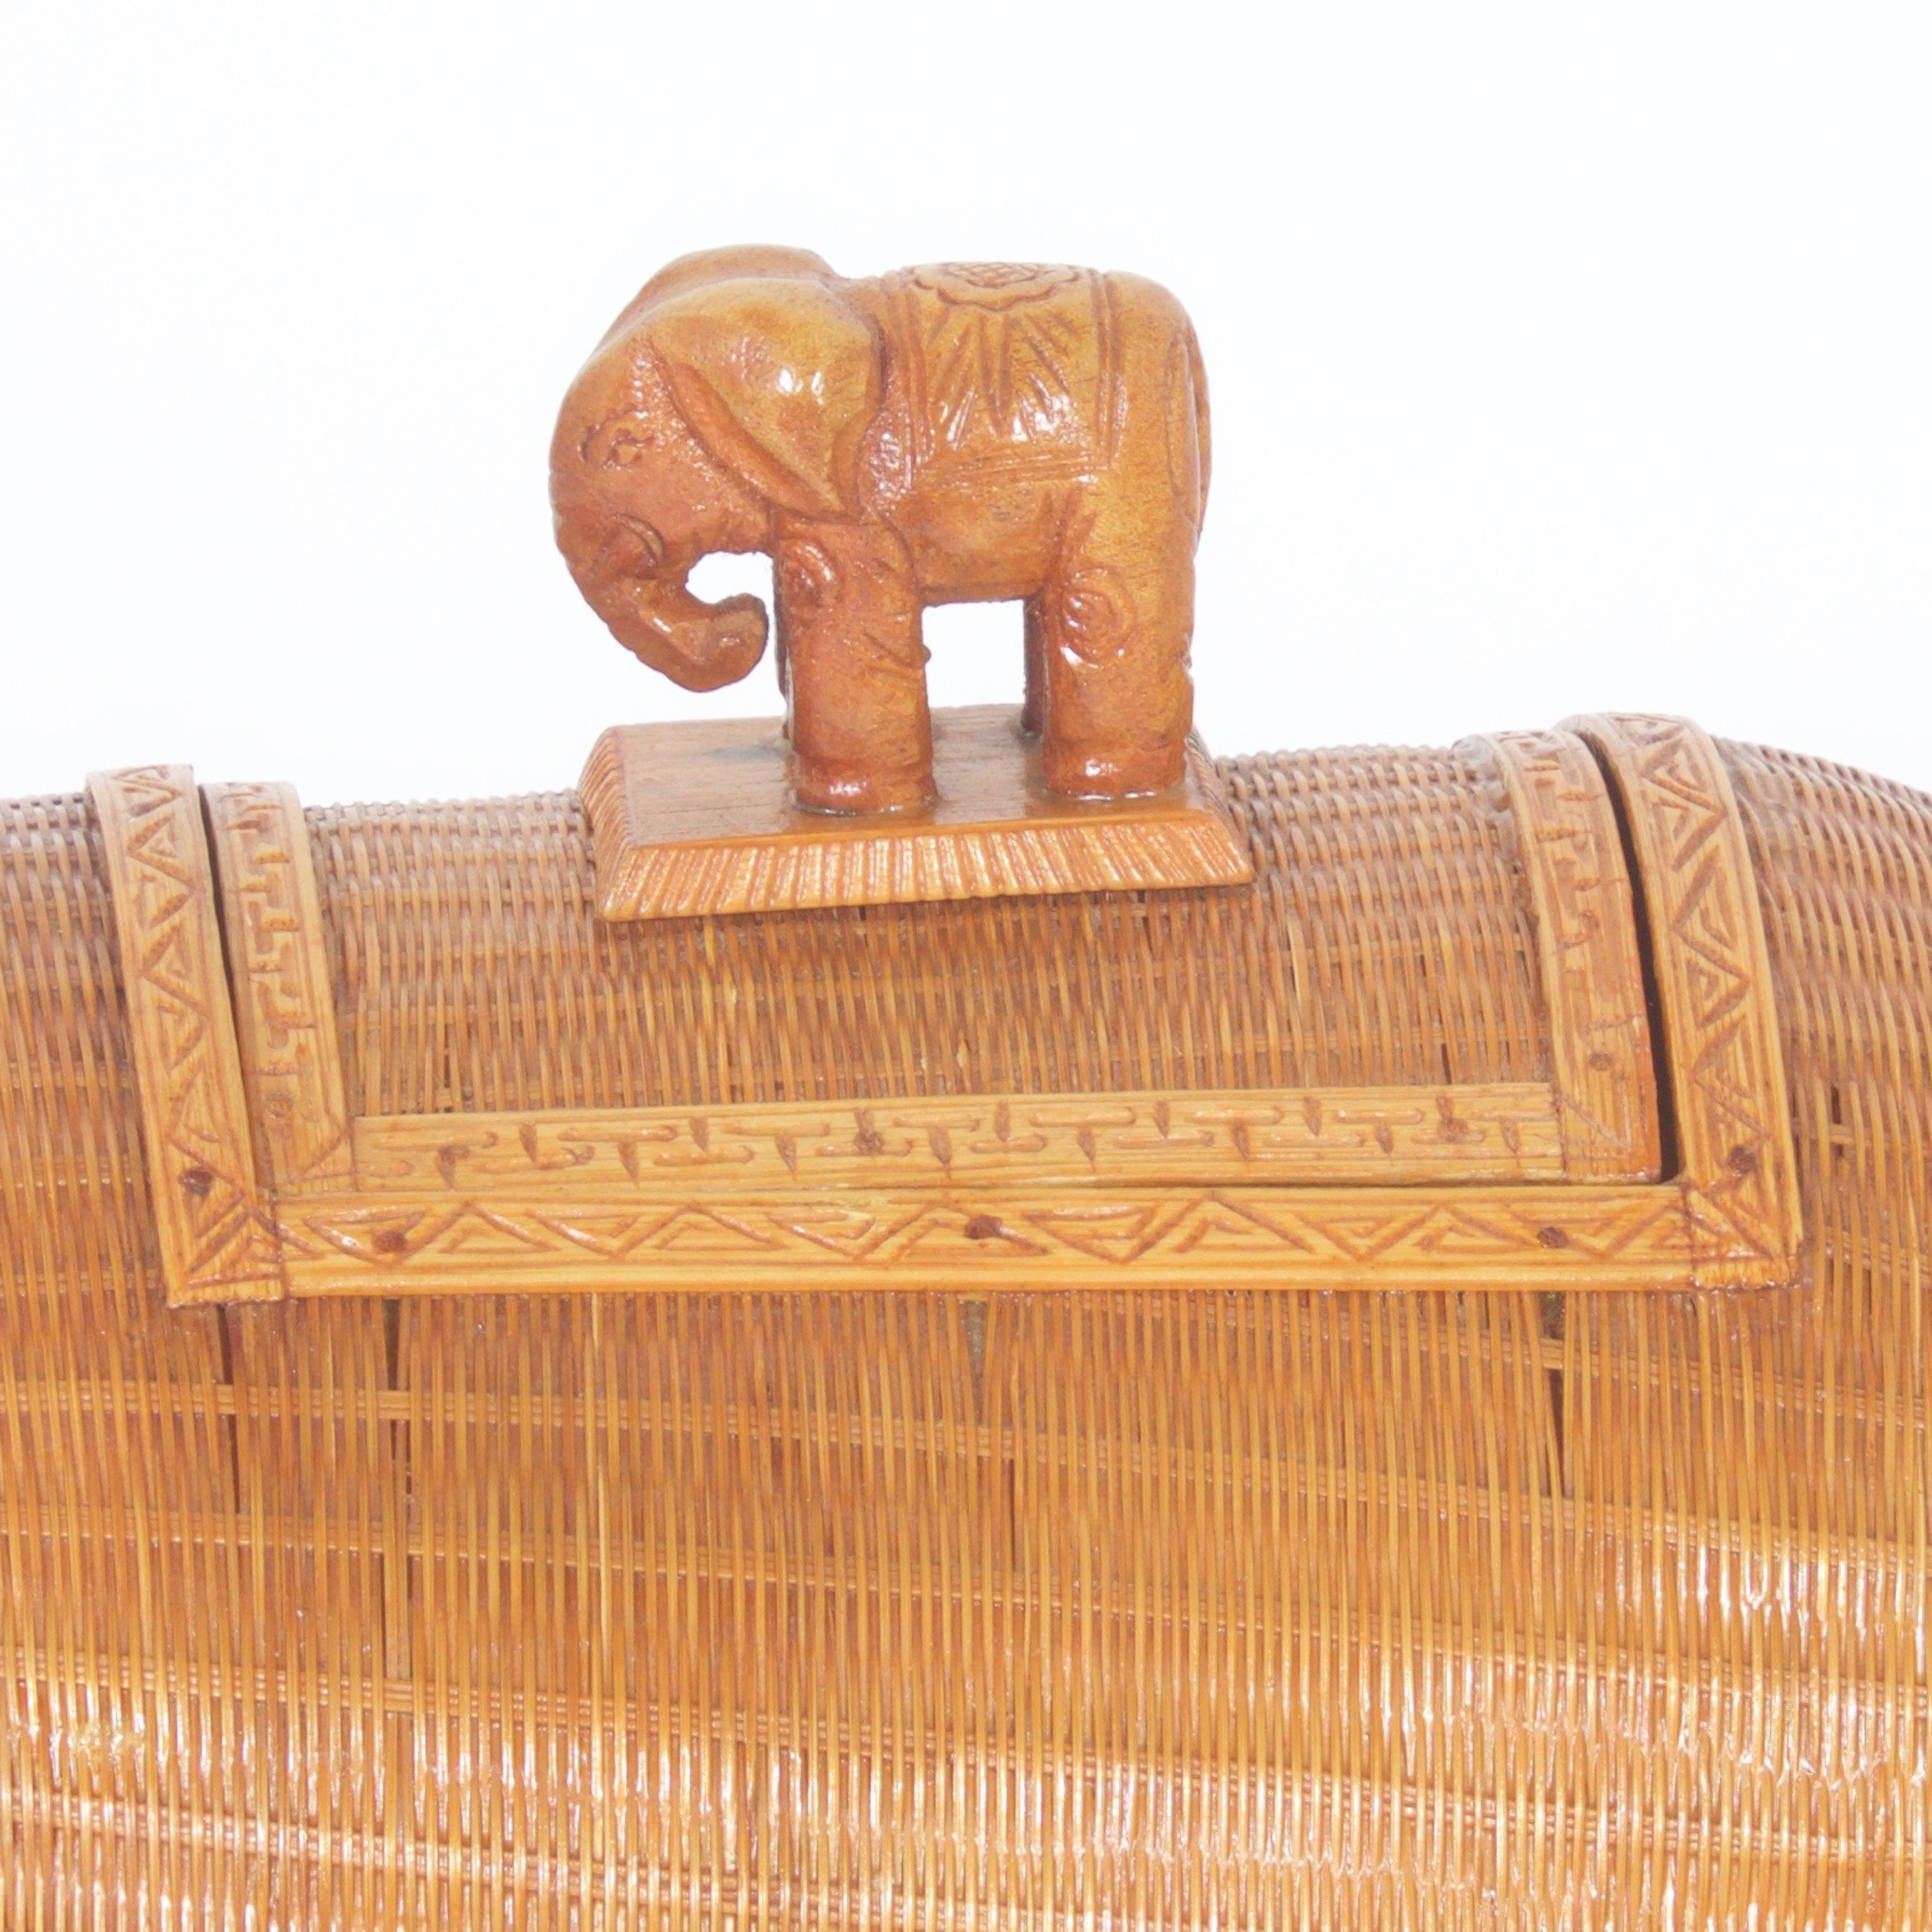 Adorable, chubby mid century wicker elephant box with a woven reed structure. Having a smaller elephant as a handle on top of a storage lid bordered with geometrics.